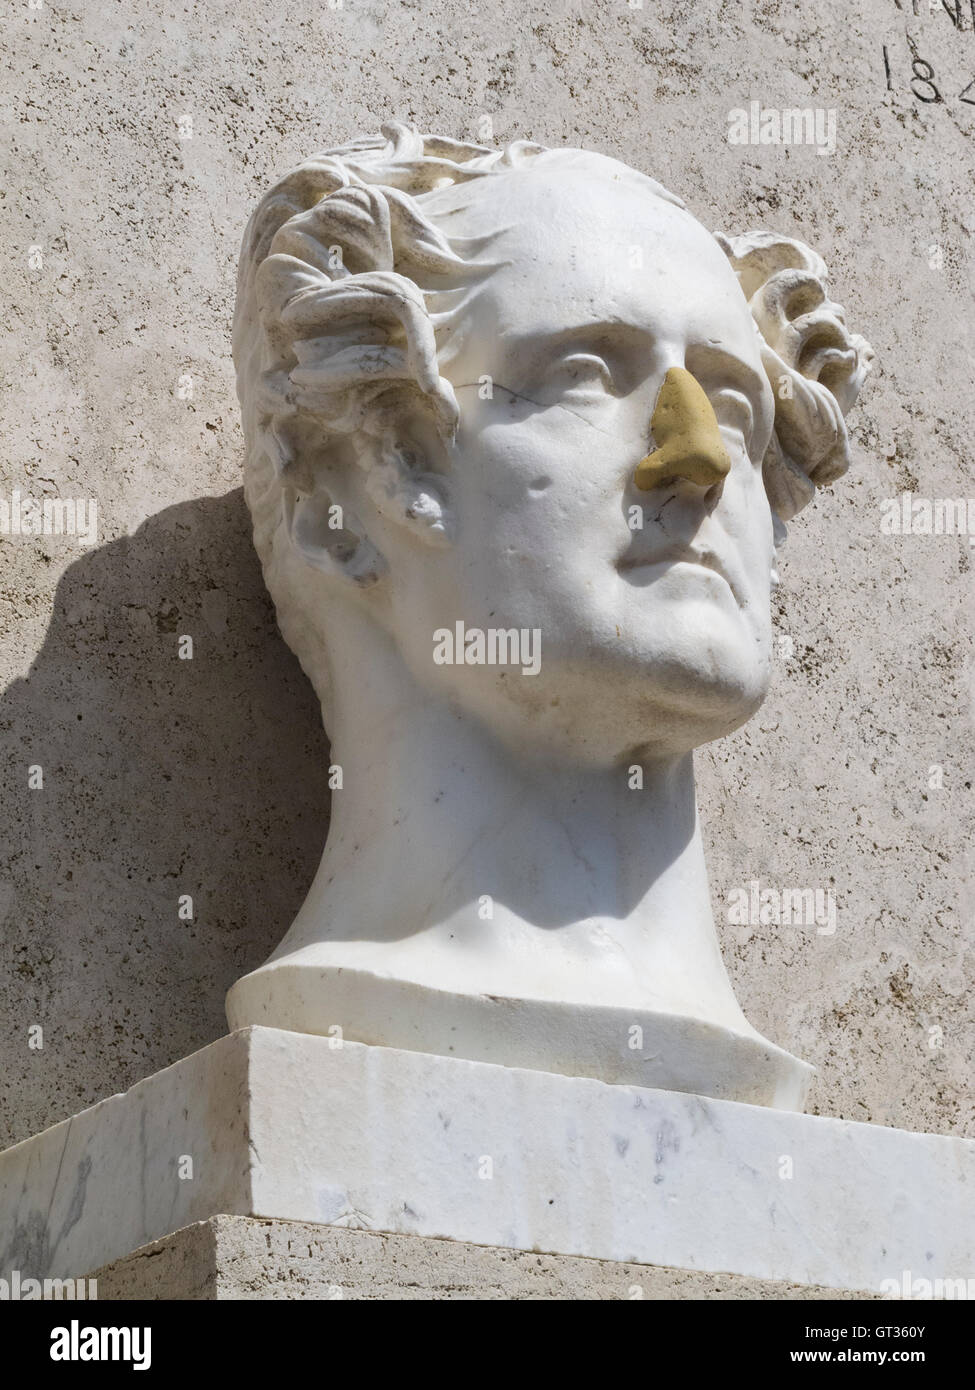 A statue in Rome where the nose has been damaged and replaced. But replaced badly. Stock Photo